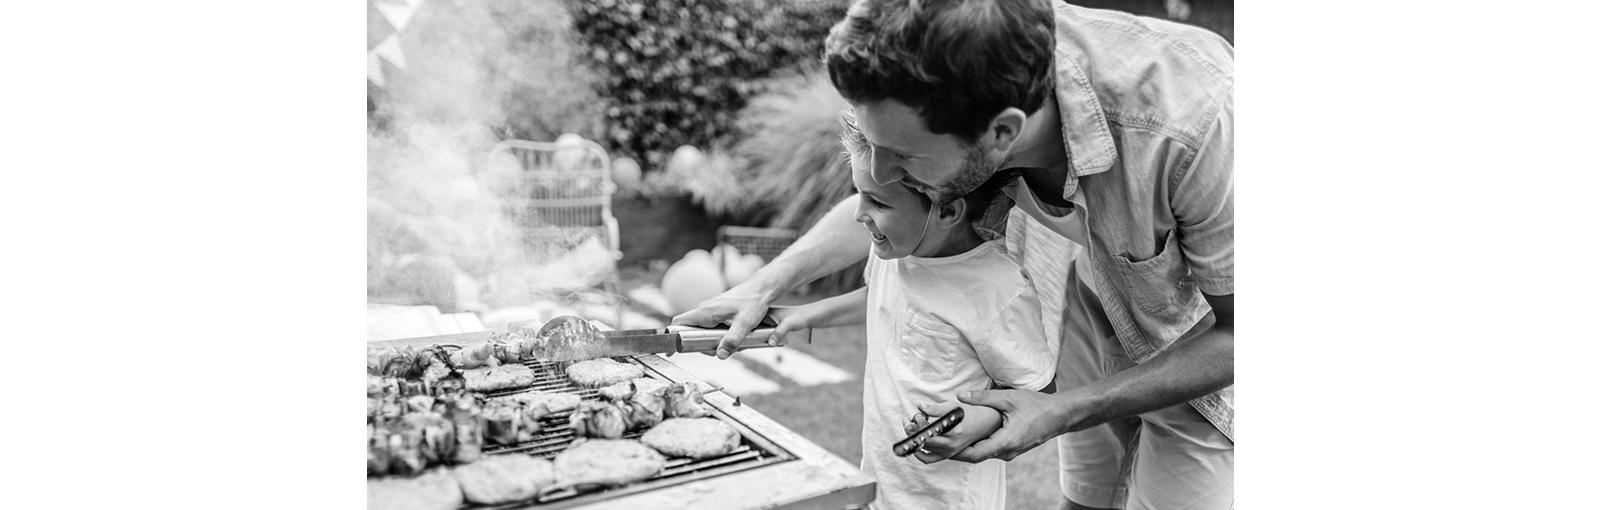 Father teaching child how to grill